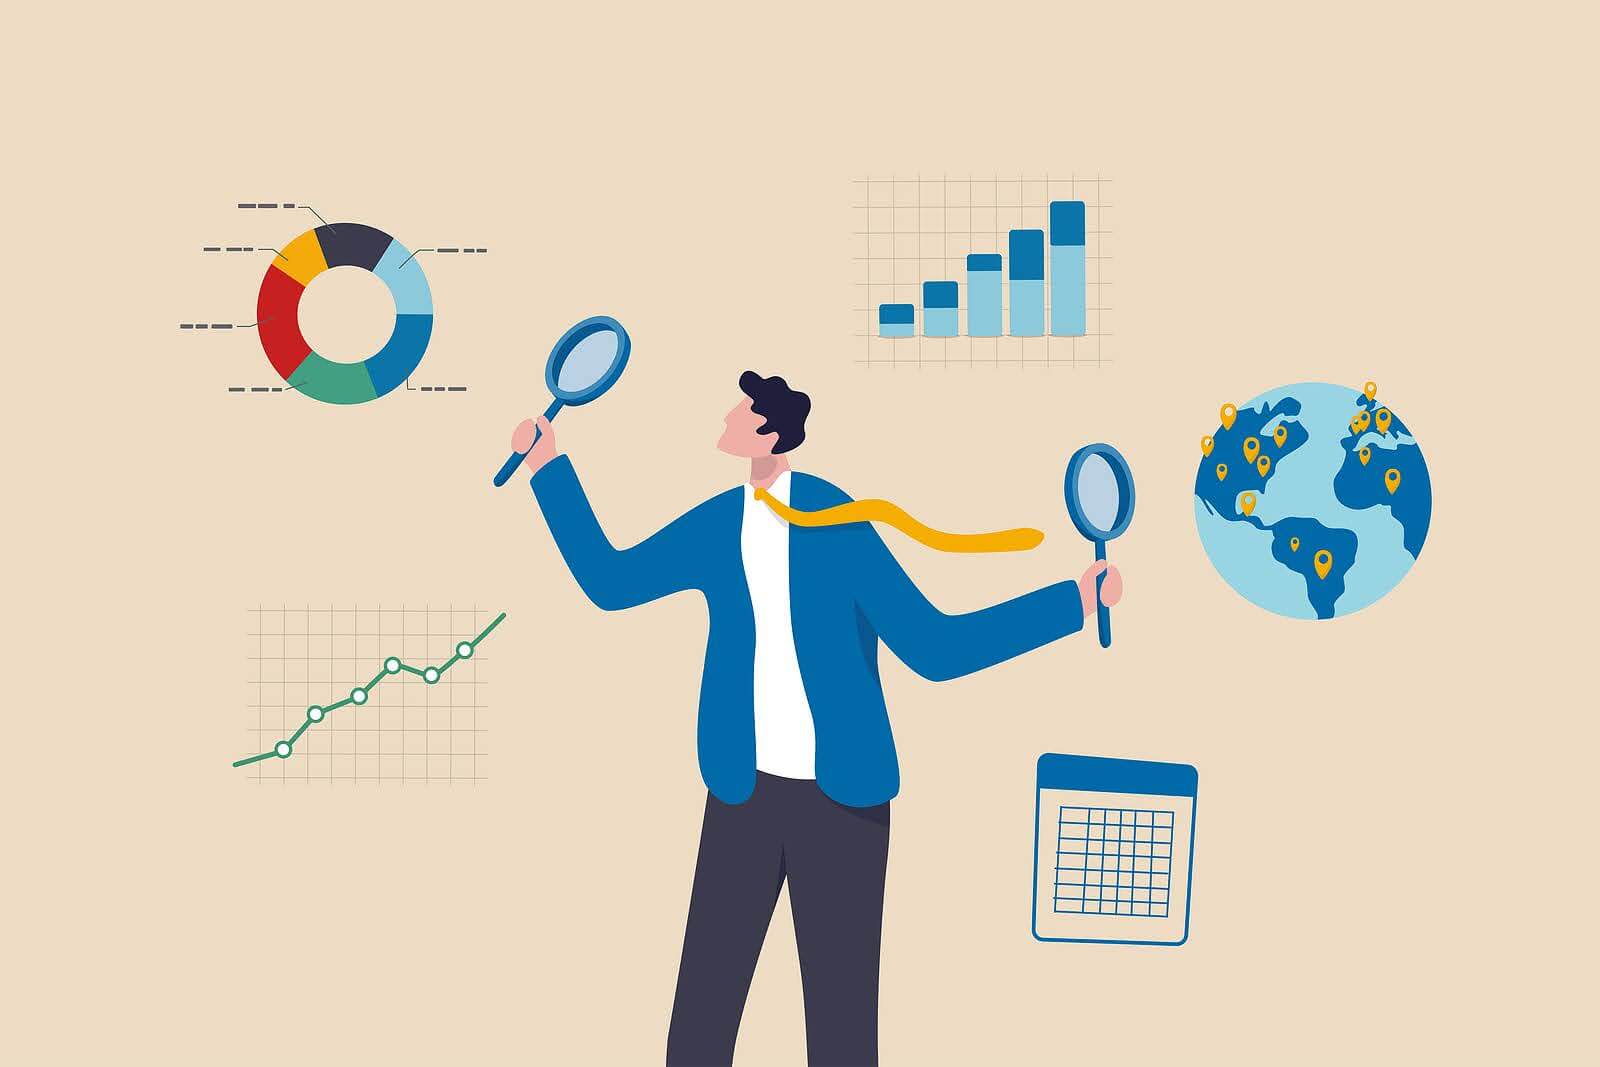 Cartoon of a man with magnifying glasses with different charts around him. Looking to understand SEO basics? Our team of SEO specialists can help teach you about SEO tools today!